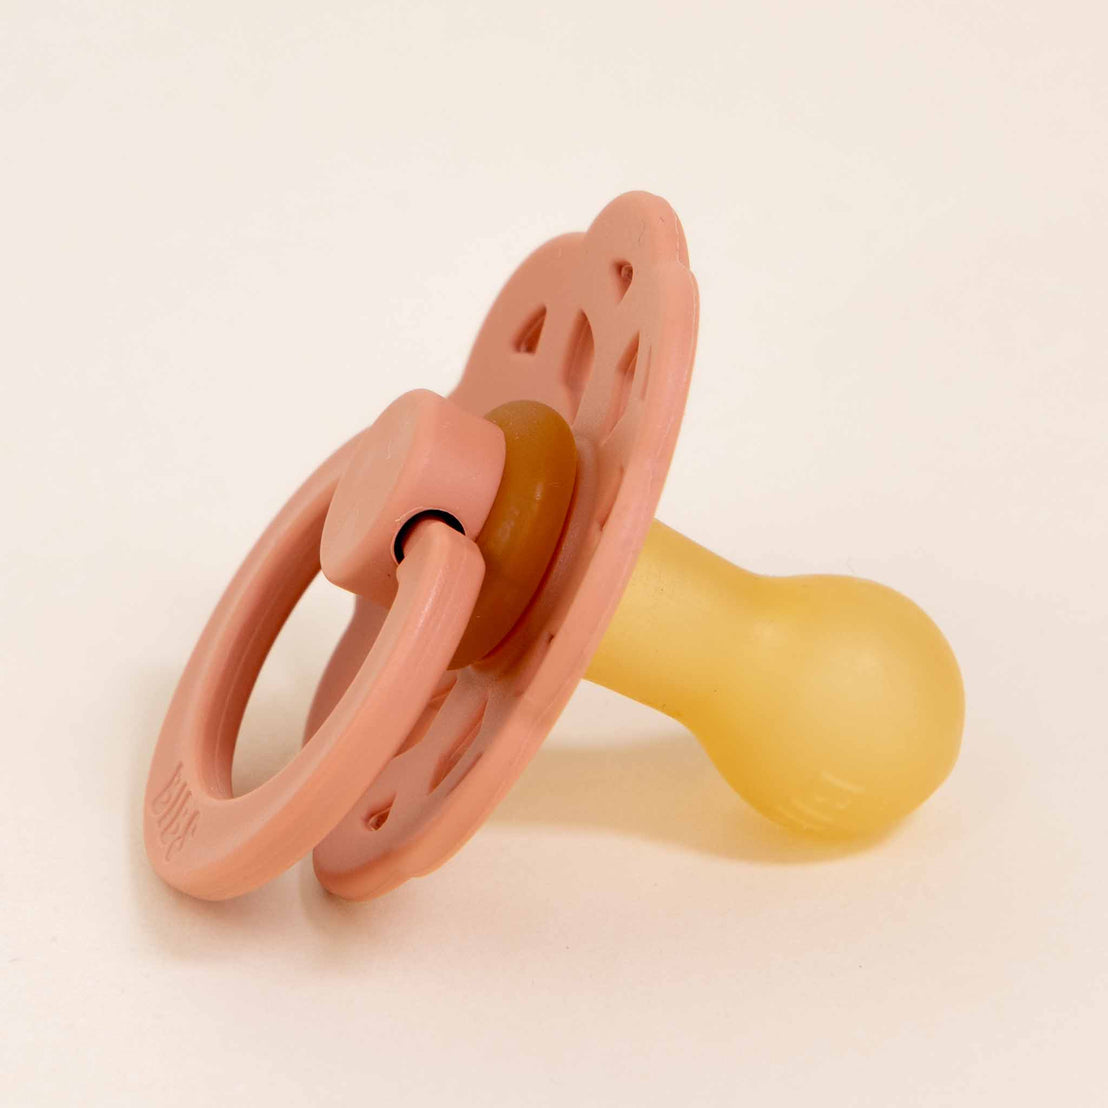 A Bibs Lace Pacifier in Peach with a handle, lying on a light beige background. The pacifier has a smooth, bulbous rubber nipple and a vented shield.